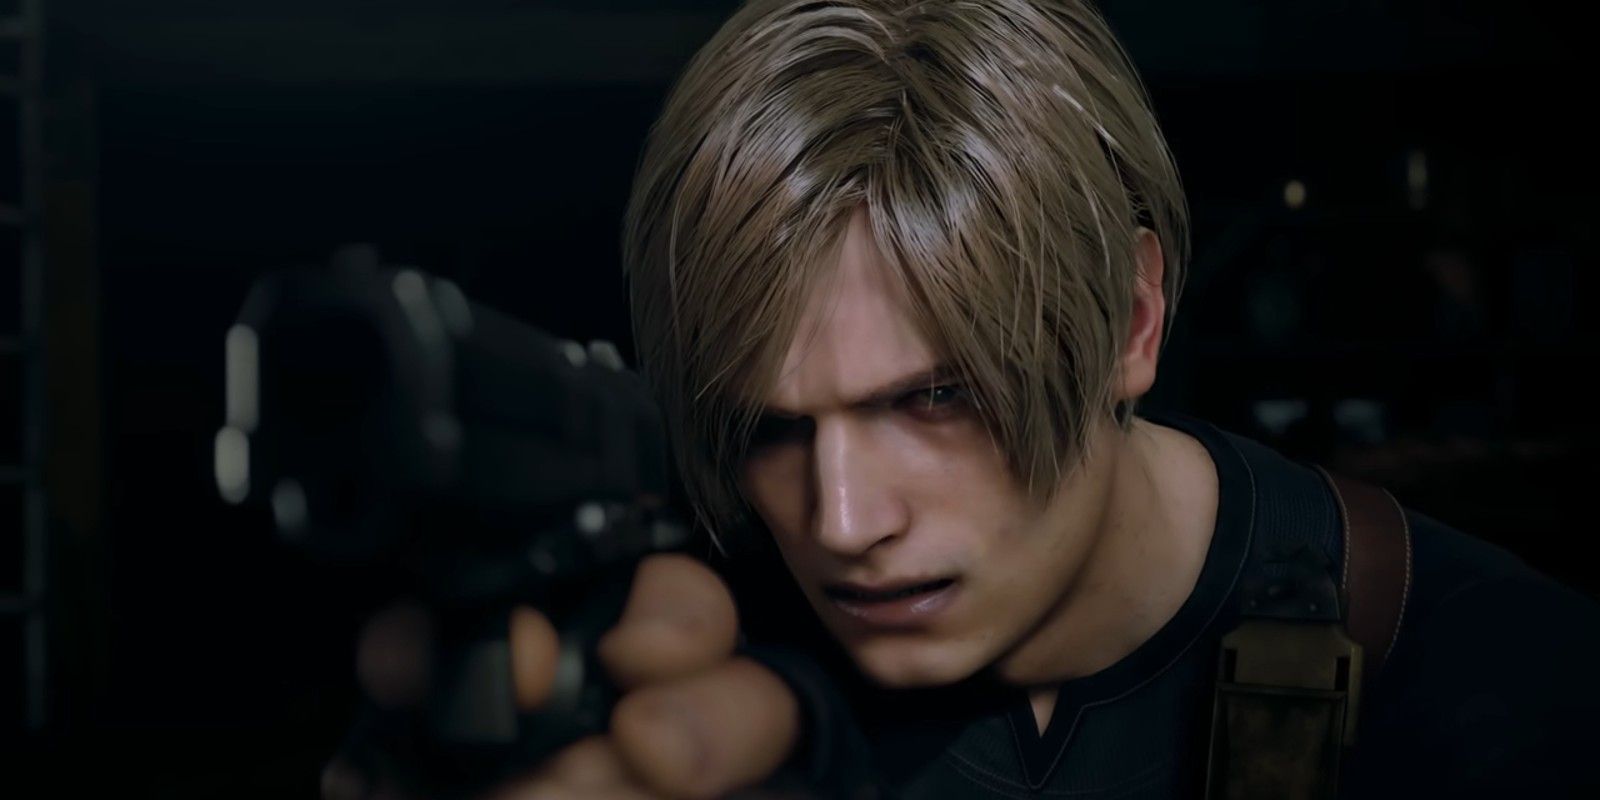 Resident Evil 4 Remake: Leon S. Kennedy, frowning, aims a gun slightly to the left of the viewer